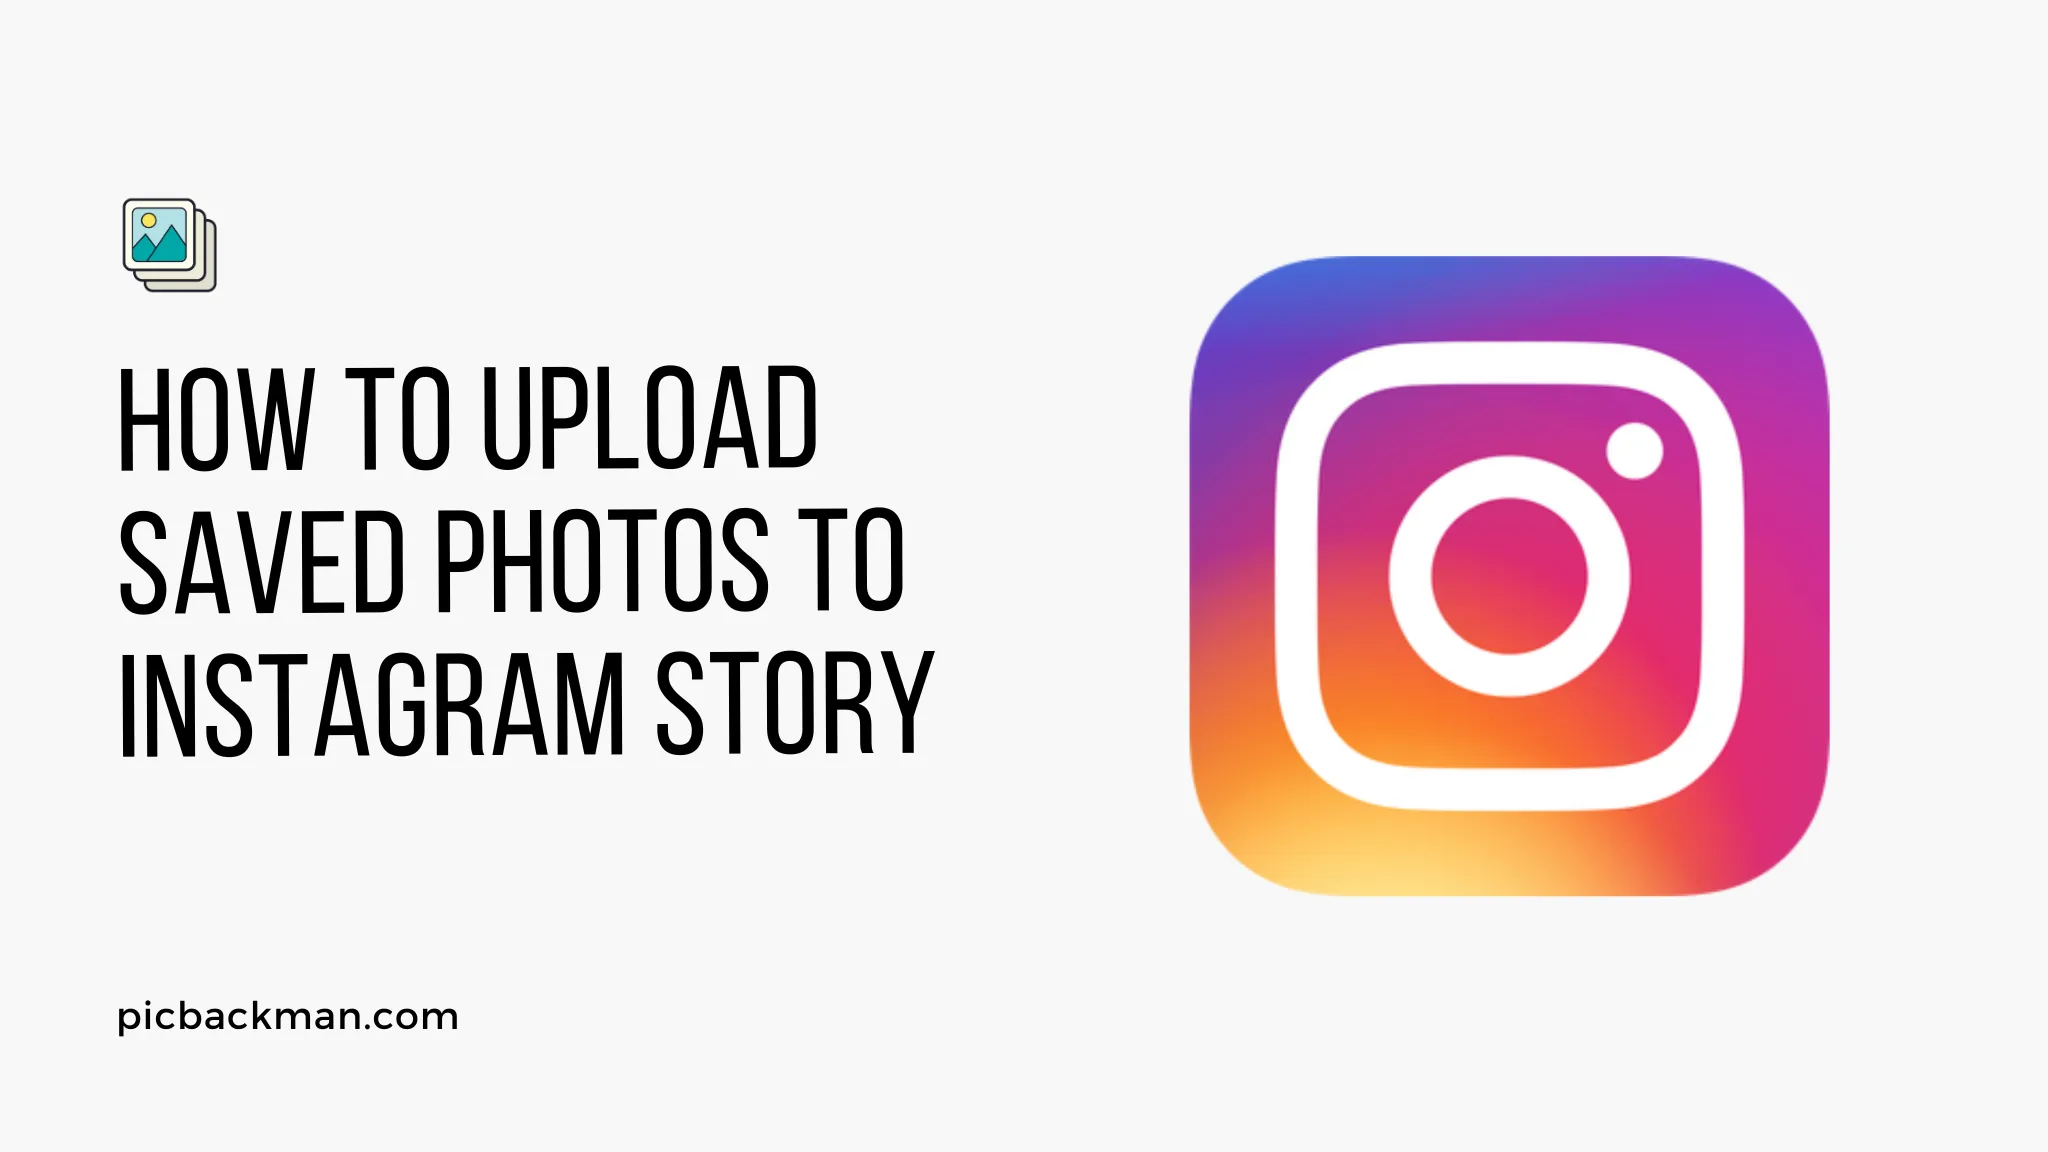 How to upload saved photos to Instagram story?